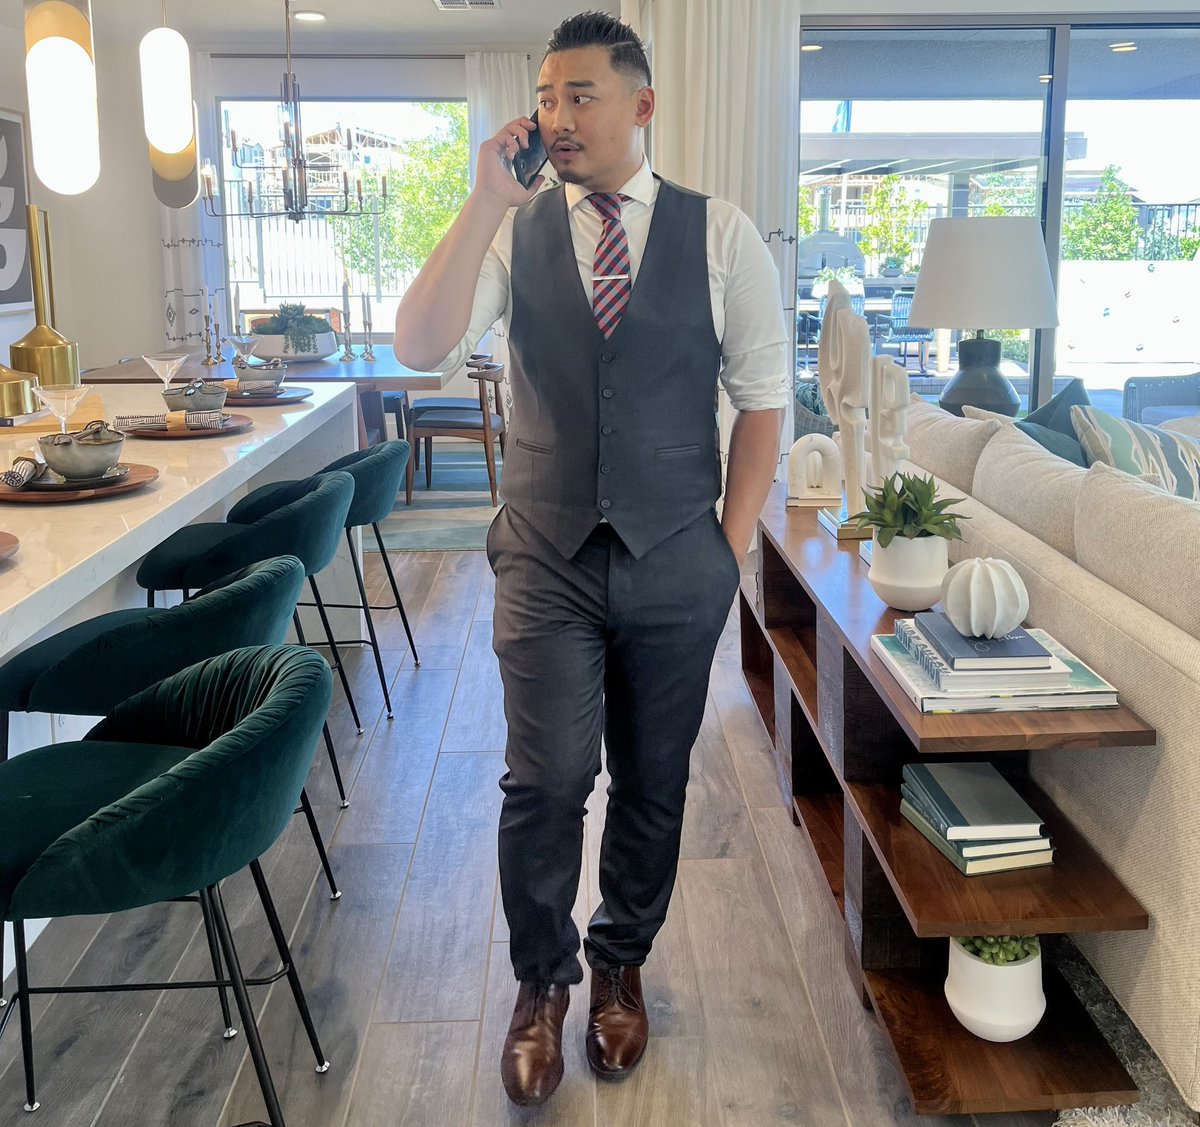 Conversations on the move. Lost in the moment, but never missing a beat 🚶‍♂️📱

#lasvegasrealestate #lasvegasrealestateagent #lasvegasrealtor #luxury #lasvegasmarket #lasvegas #lasvegasluxury #luxuryrealestate #luxuryhomes #newconstruction #newconstructionhomes #summerlinhomes